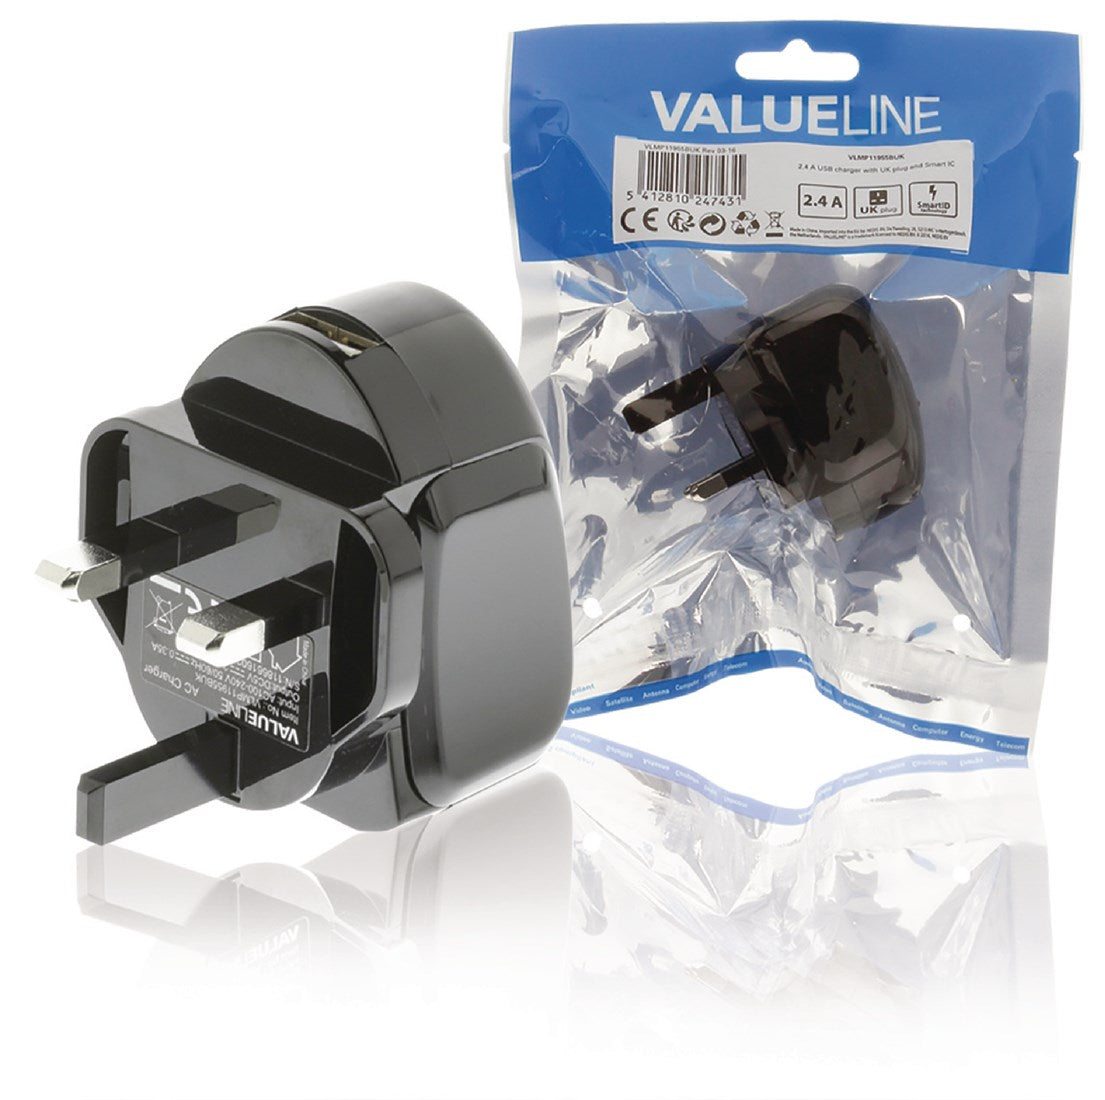 Product Image of Valueline USB Wall Charger with SmartID technology - automatically detects the required current